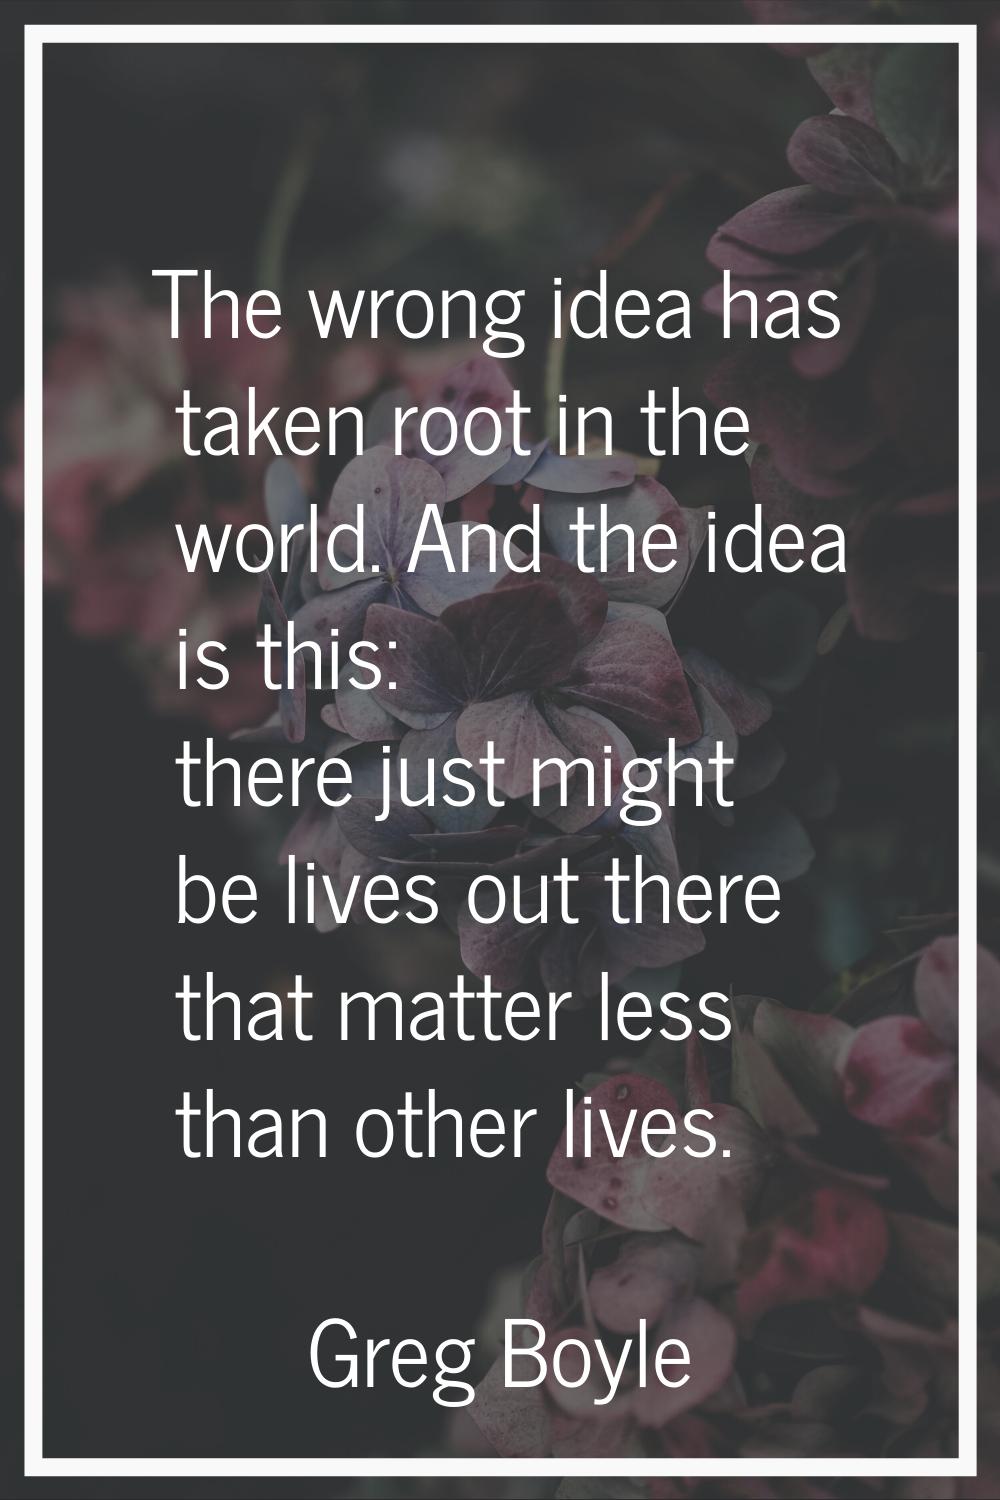 The wrong idea has taken root in the world. And the idea is this: there just might be lives out the